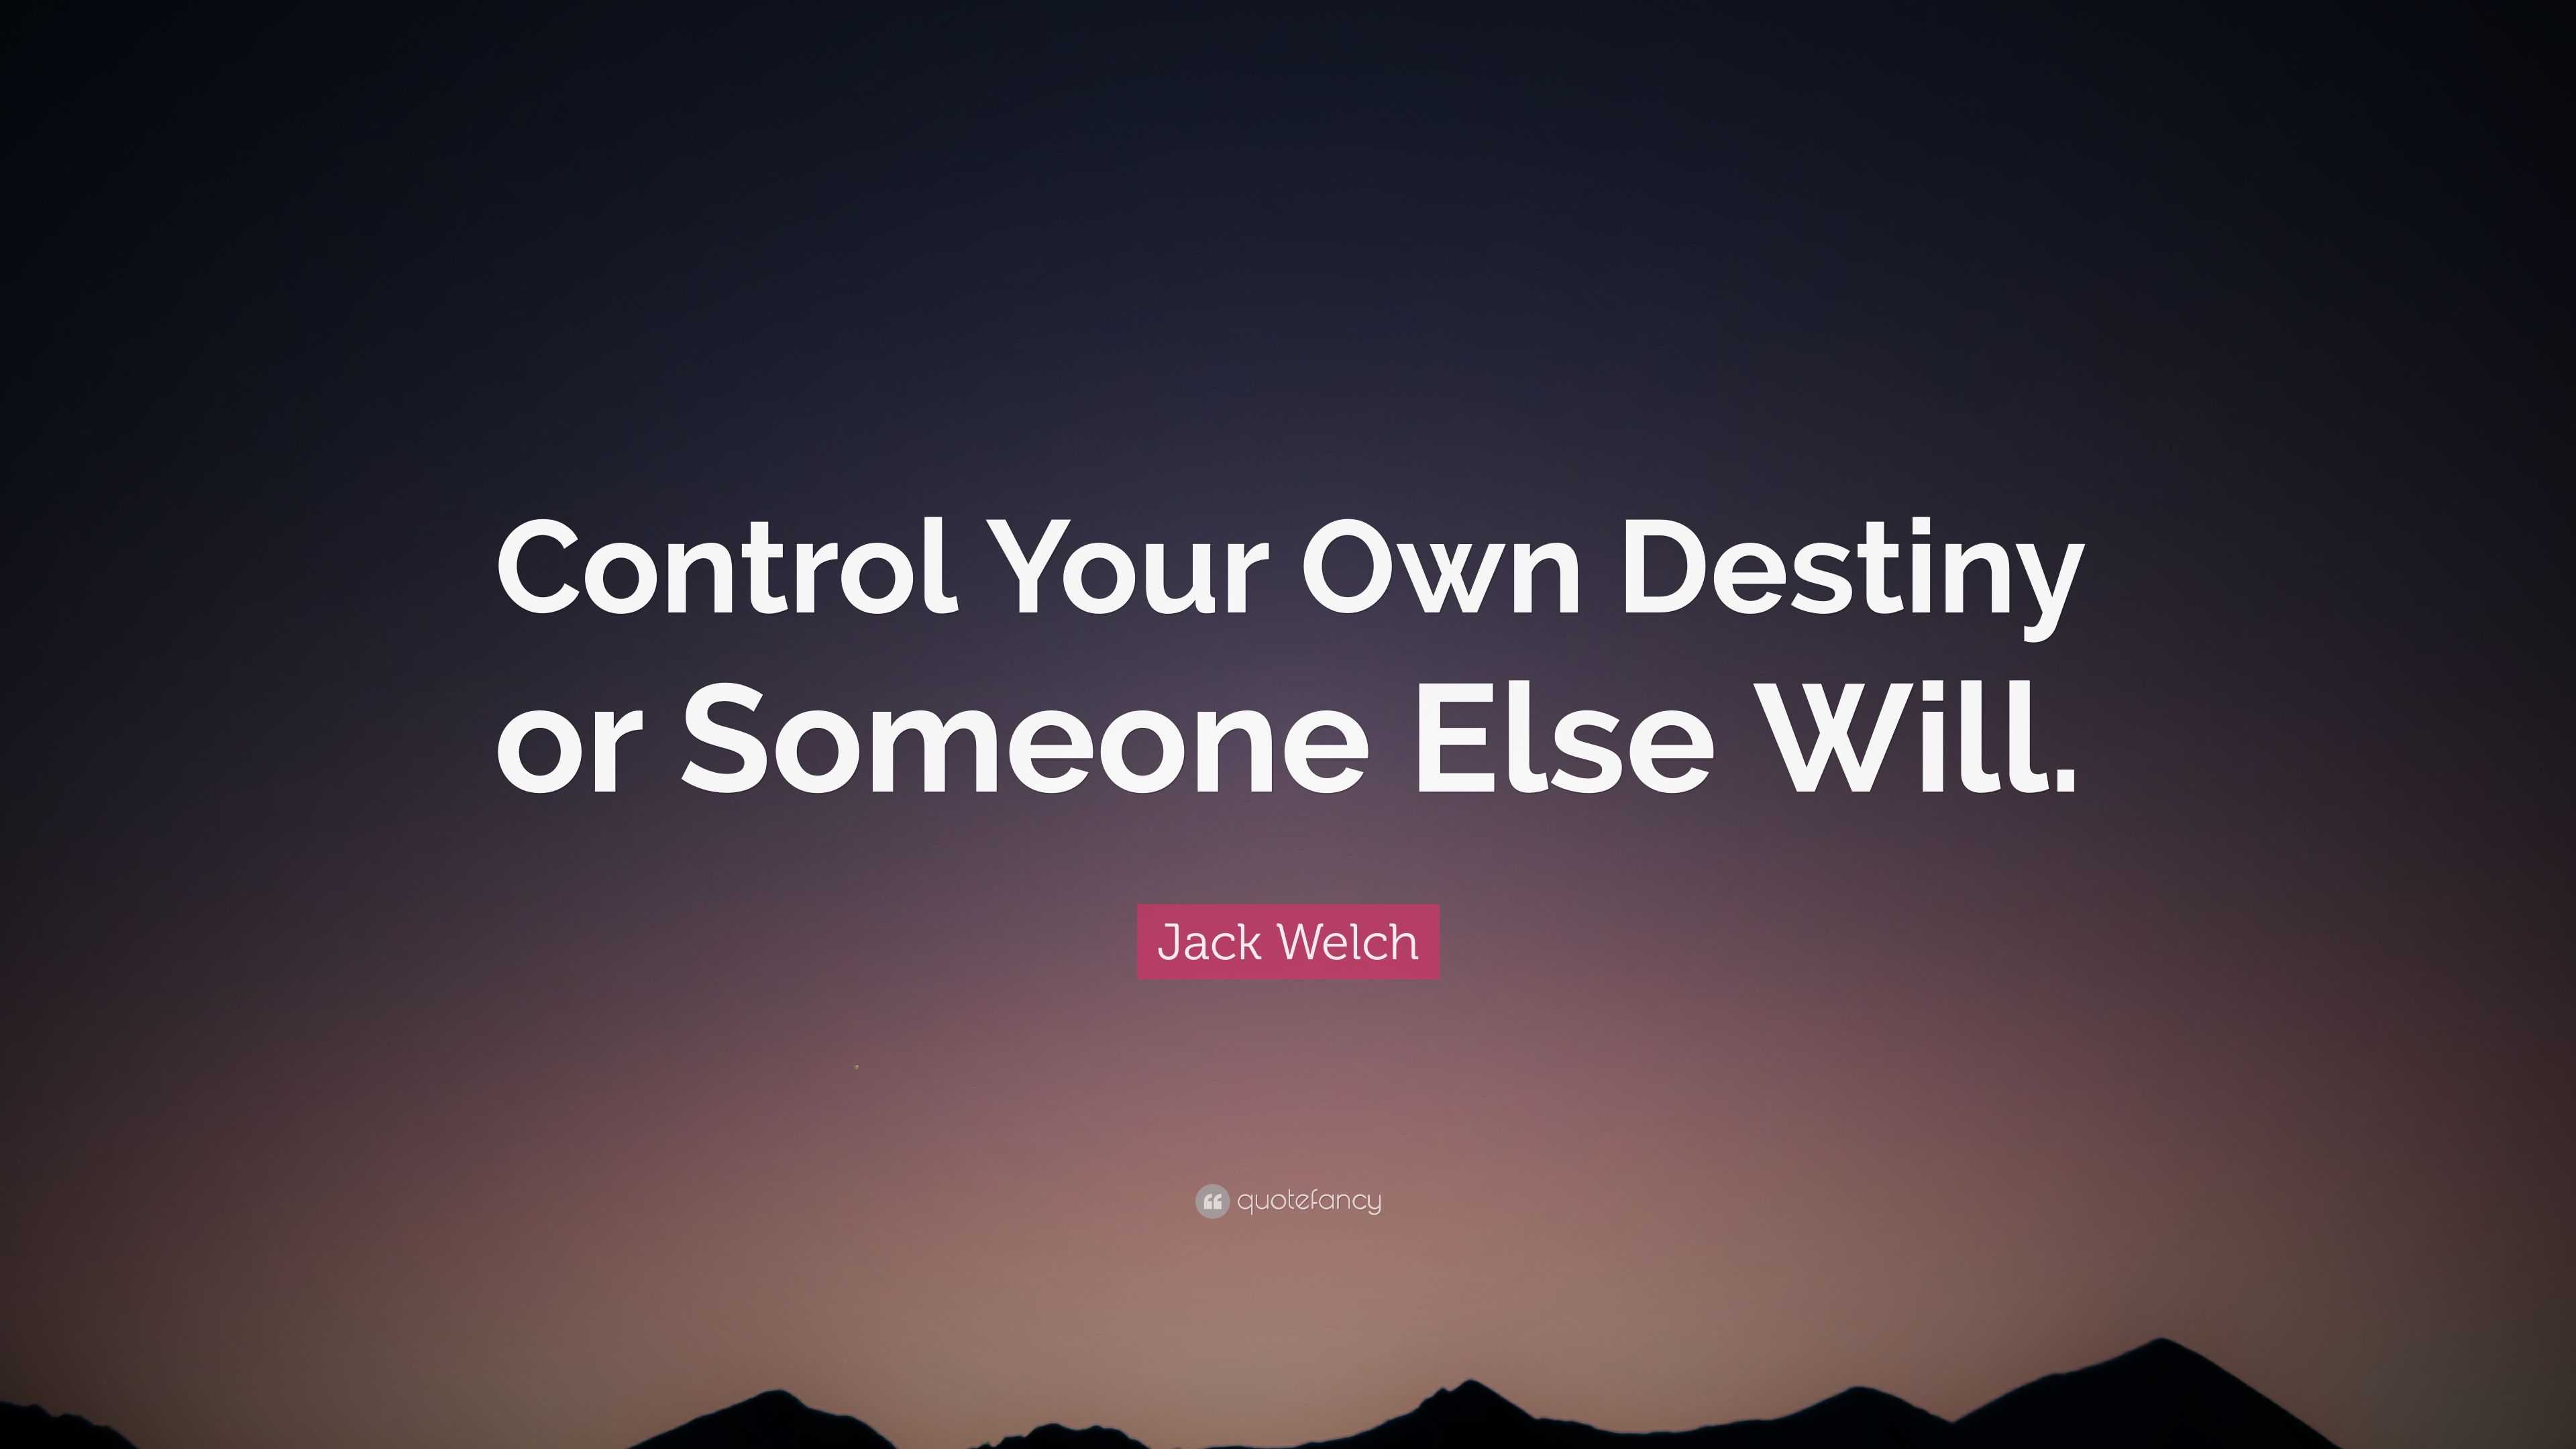 Jack Welch - Control your own destiny or someone else will.